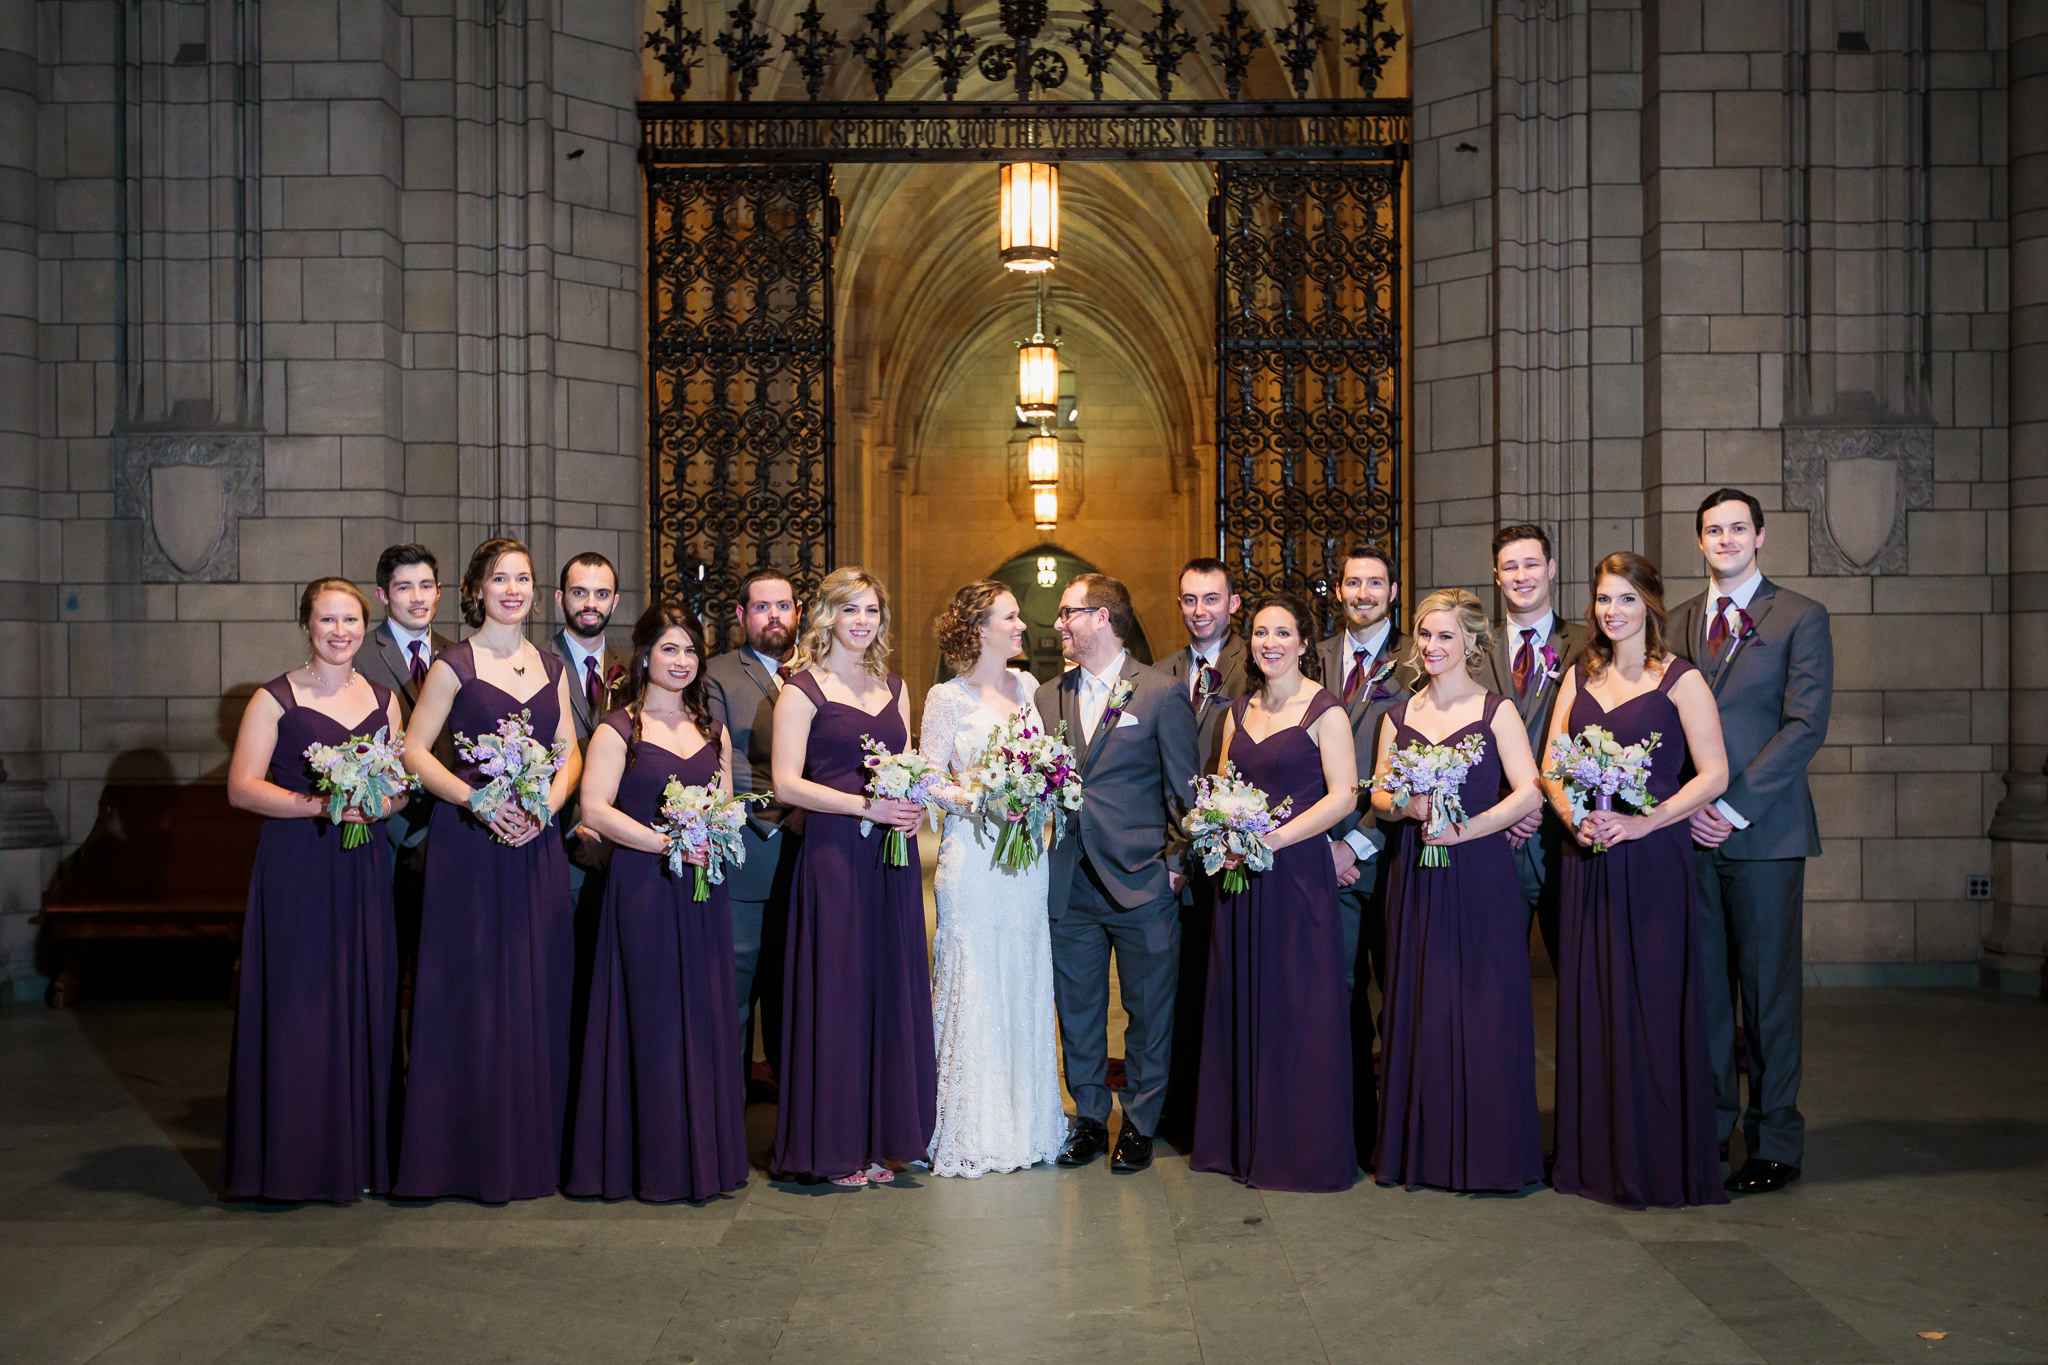 Bridal party inside the Cathedral of Learning after a Heinz Chapel wedding ceremony